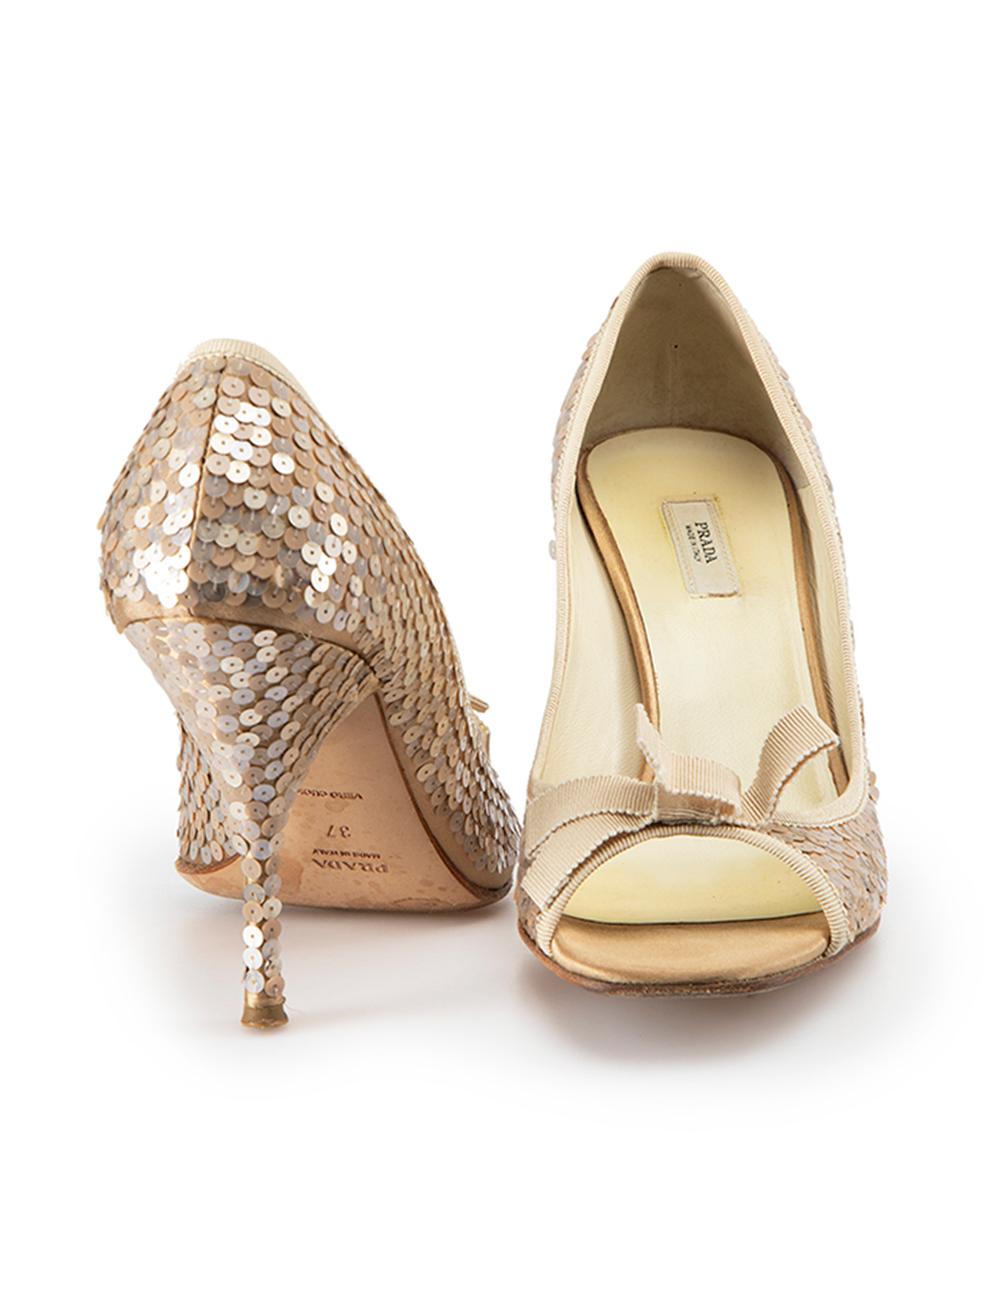 Prada 2005 Beige Pimpernel Sequin Peep Toe Heels Size IT 37 In Excellent Condition For Sale In London, GB